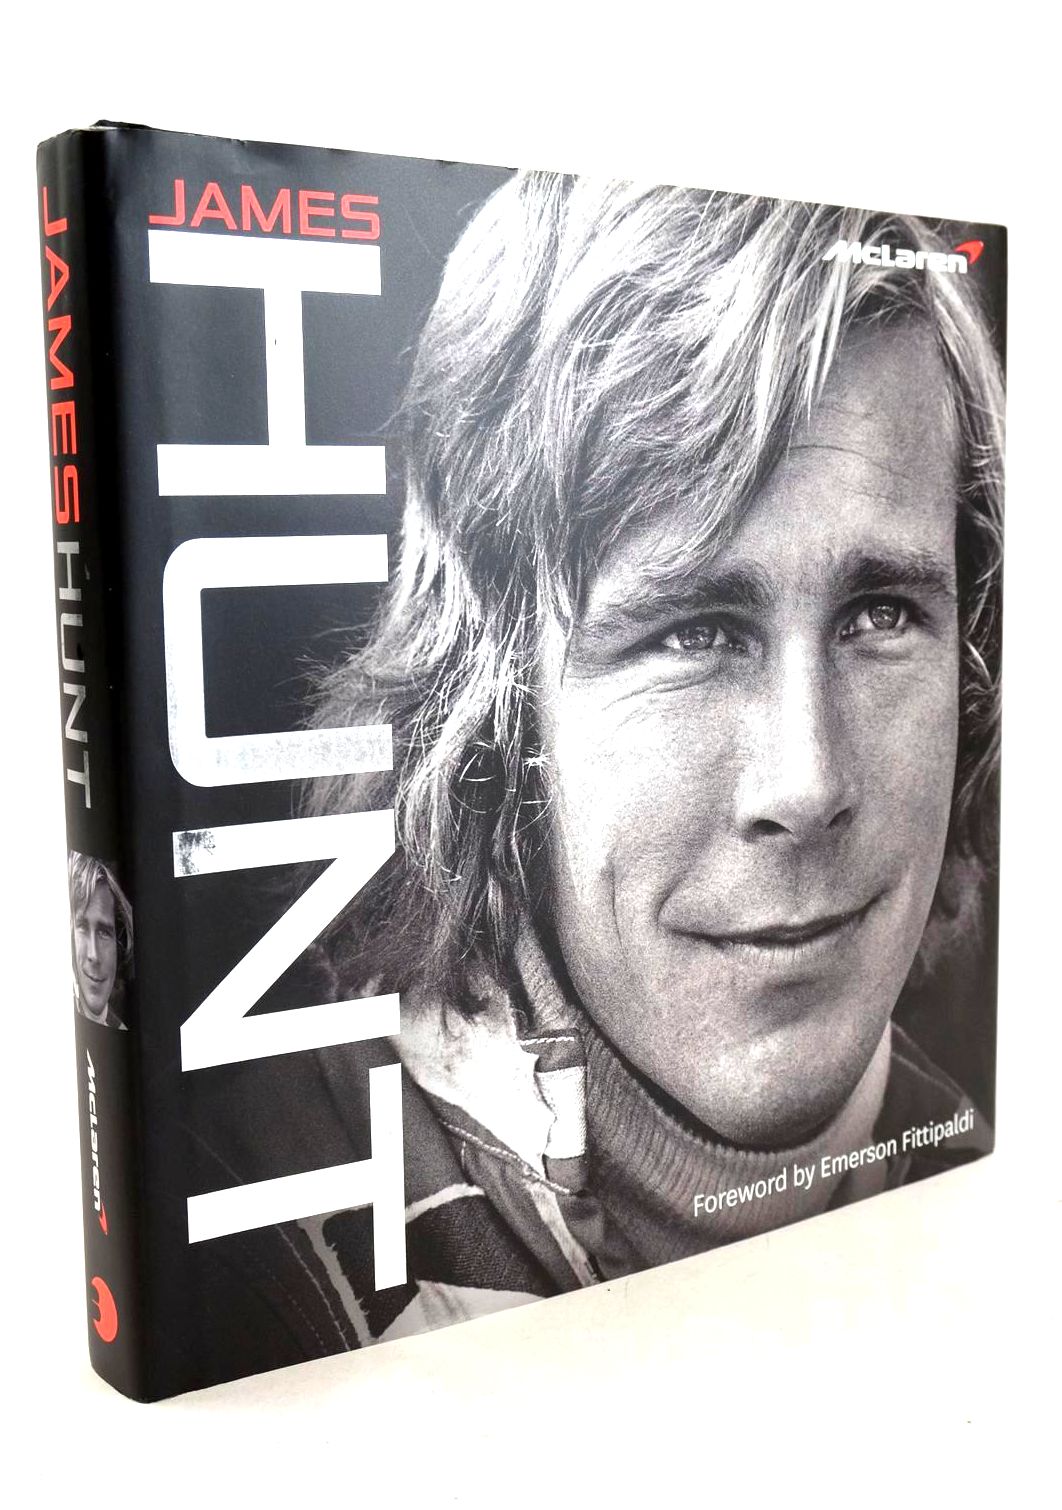 Photo of JAMES HUNT written by Hamilton, Maurice published by Blink Publishing (STOCK CODE: 1327055)  for sale by Stella & Rose's Books